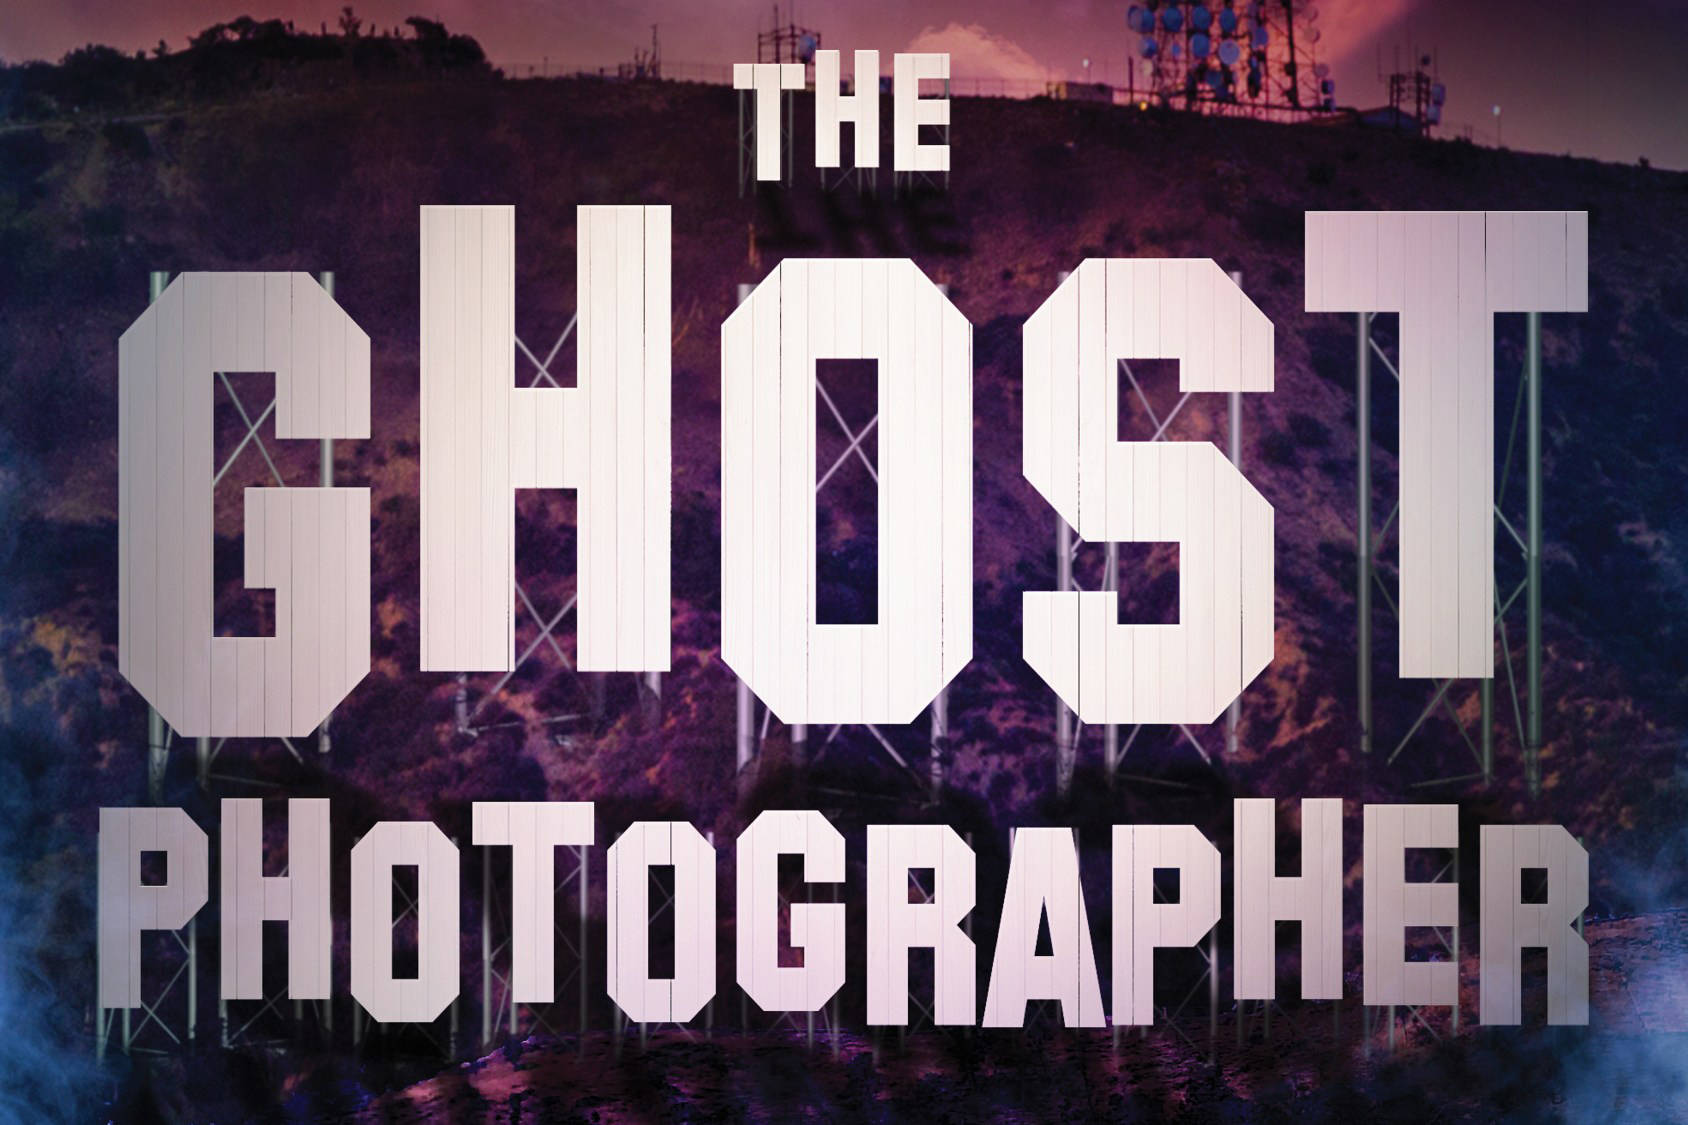 ‘The Ghost Photographer’ — Creepy, yet believable tales of Hollywood